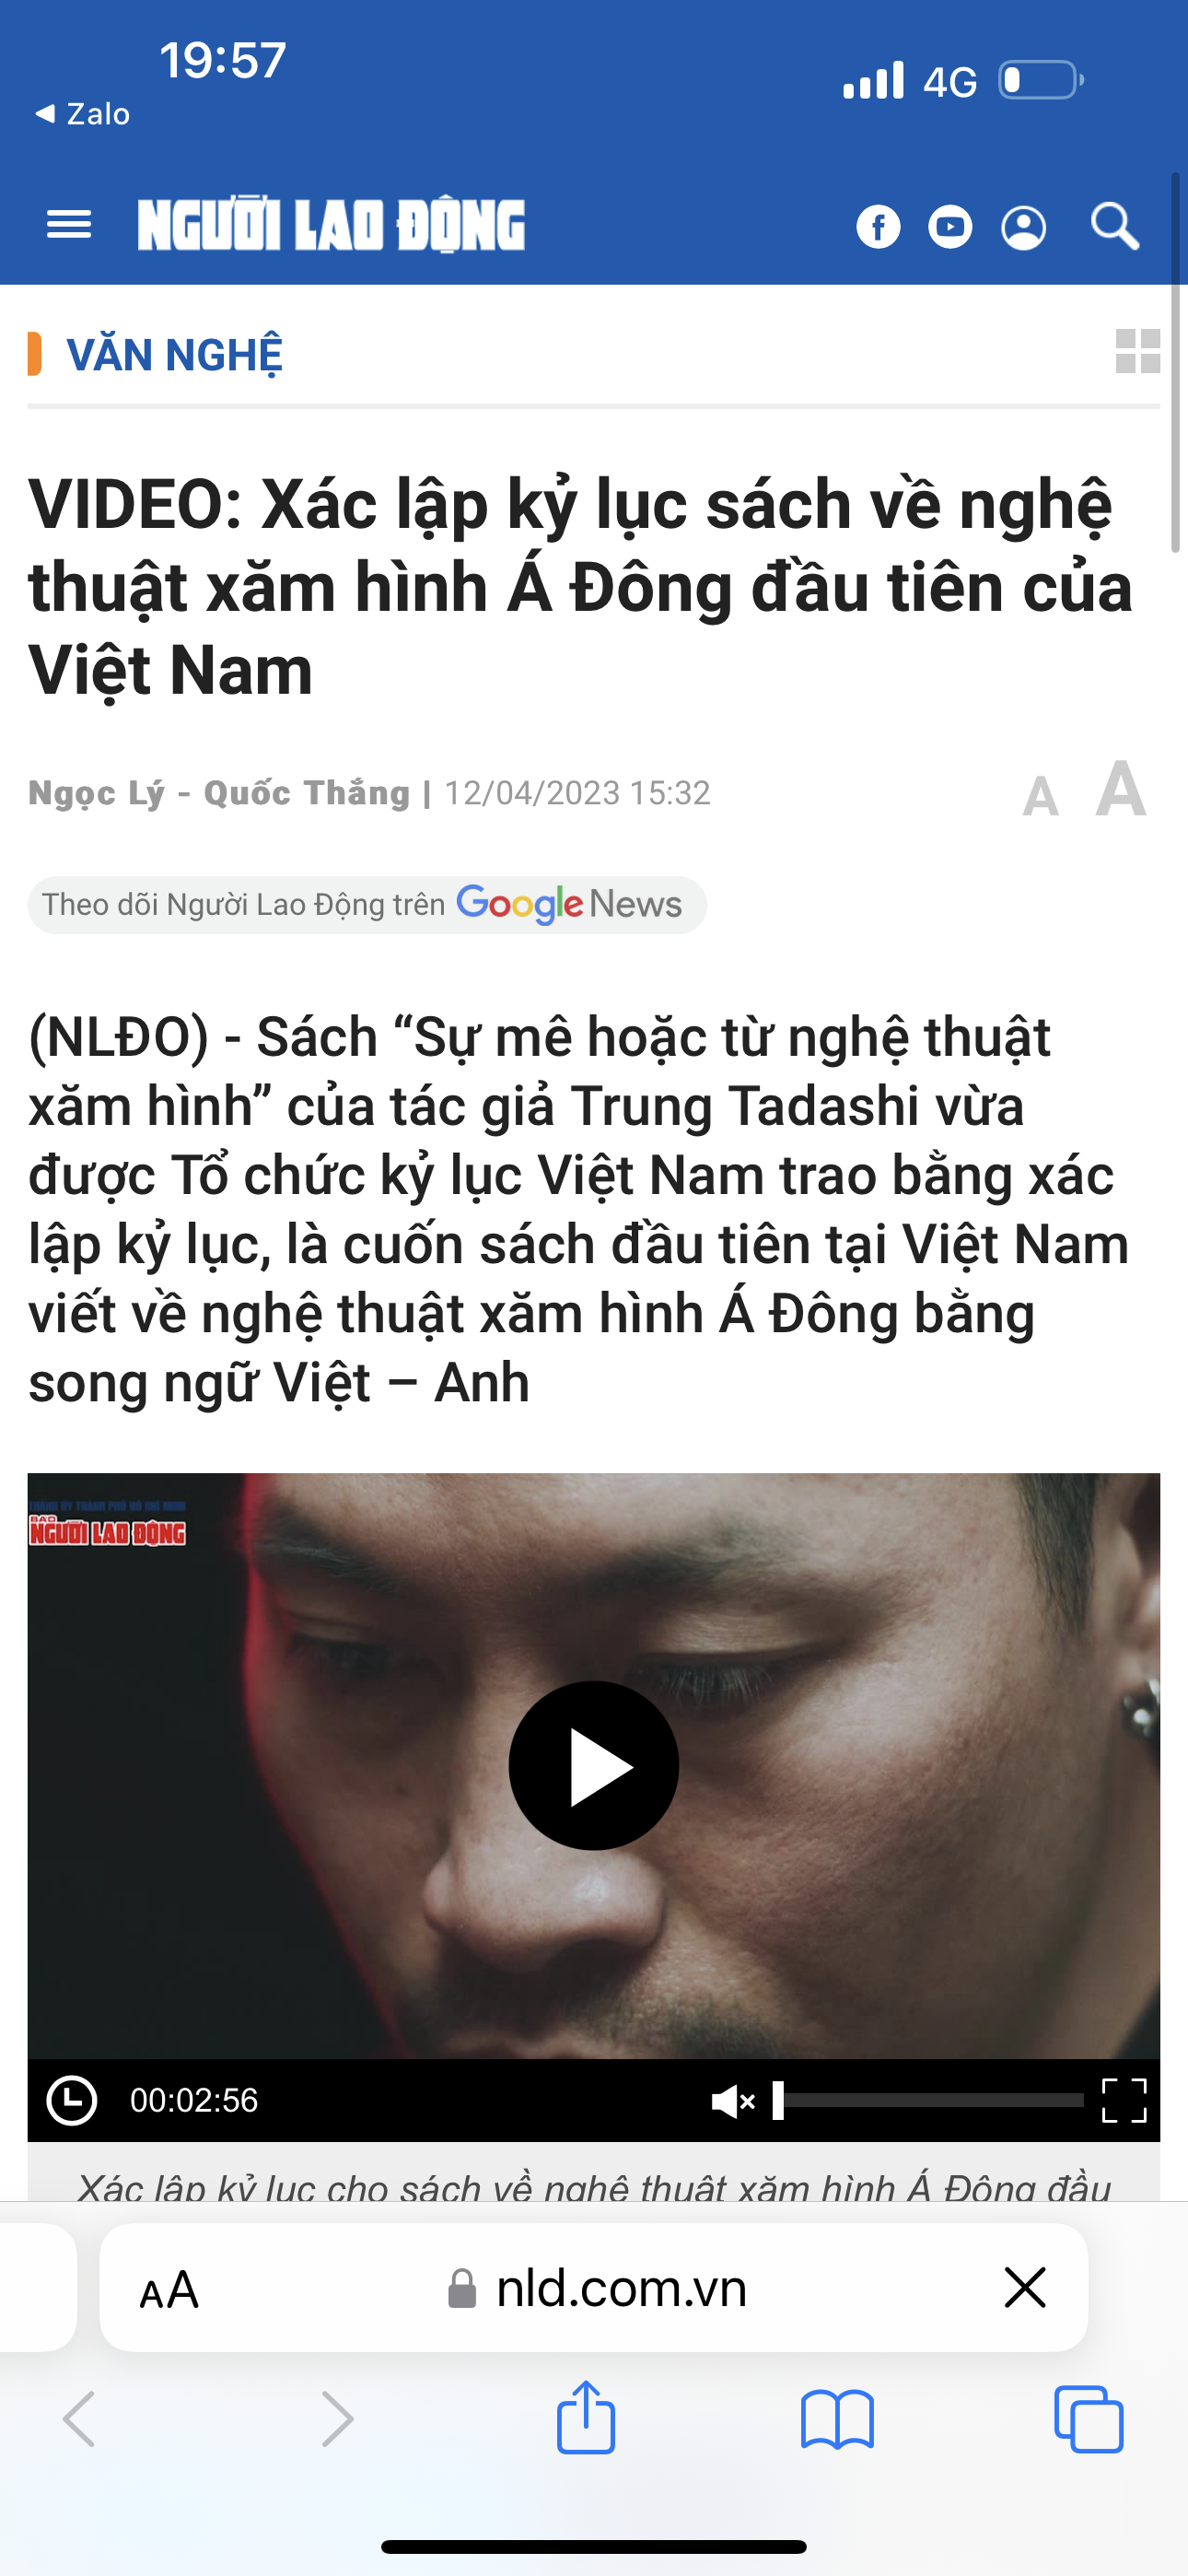 Nguoi Lao Dong online newspaper